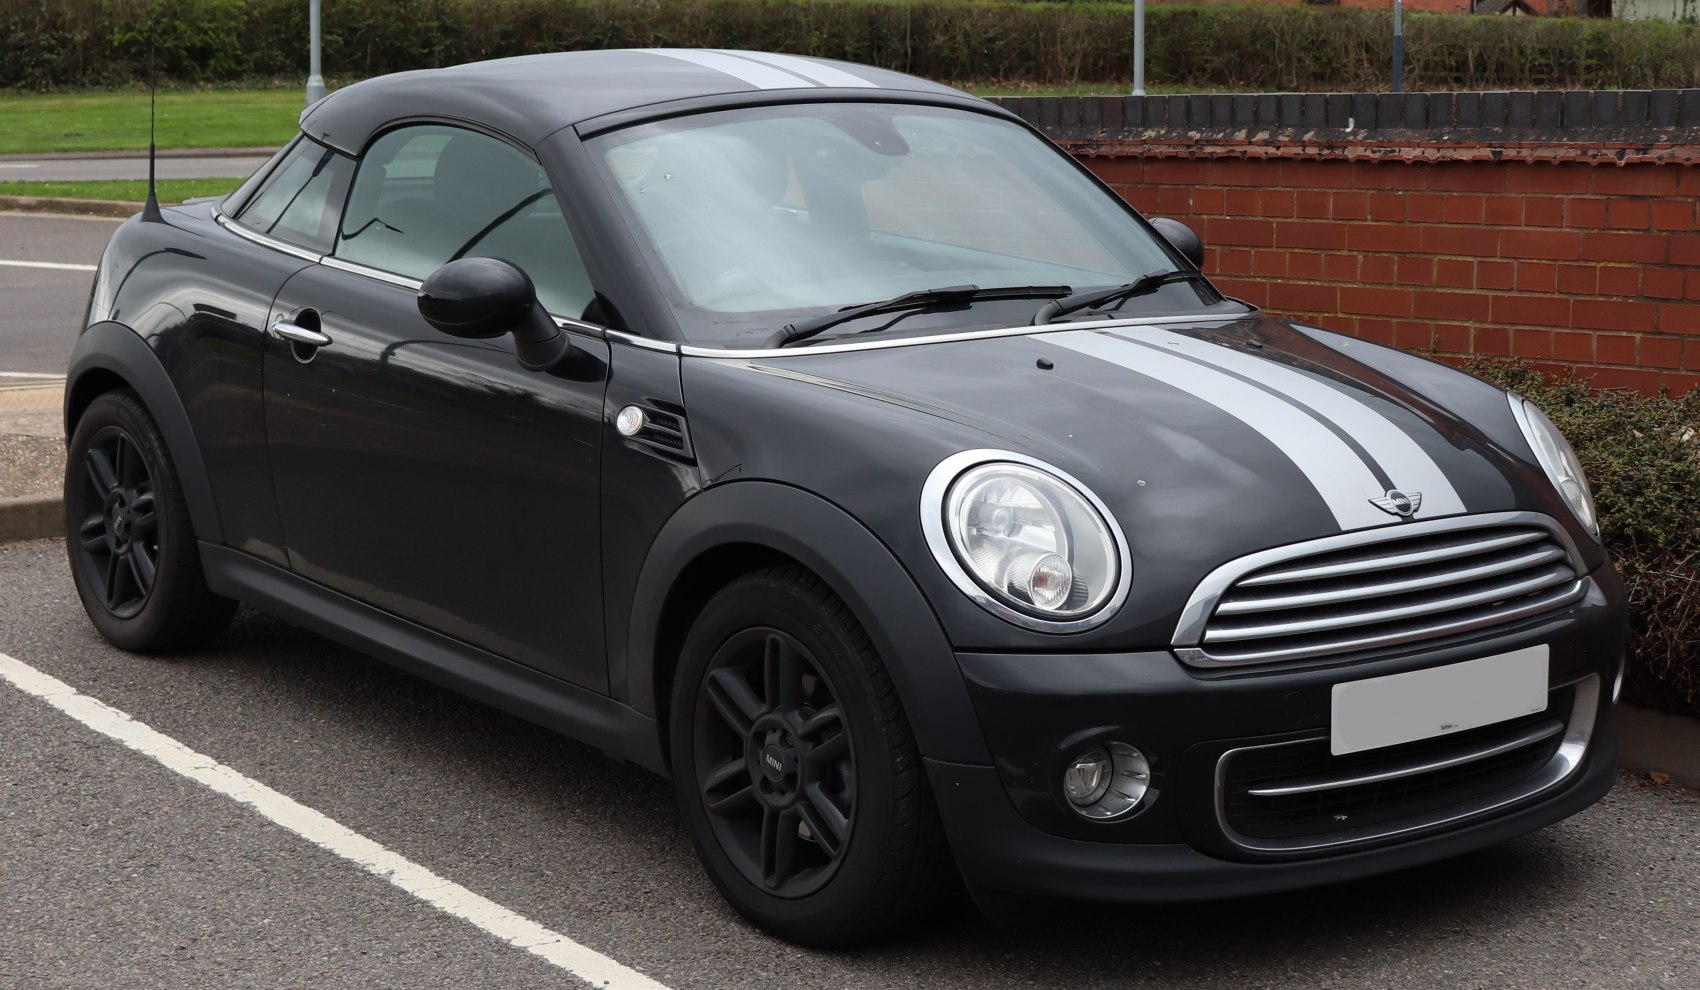 https://totalrenting.es/wp-content/uploads/2022/10/mini-coupe-r58-2011-cooper-sd-2-0-143-cv-coupe.png